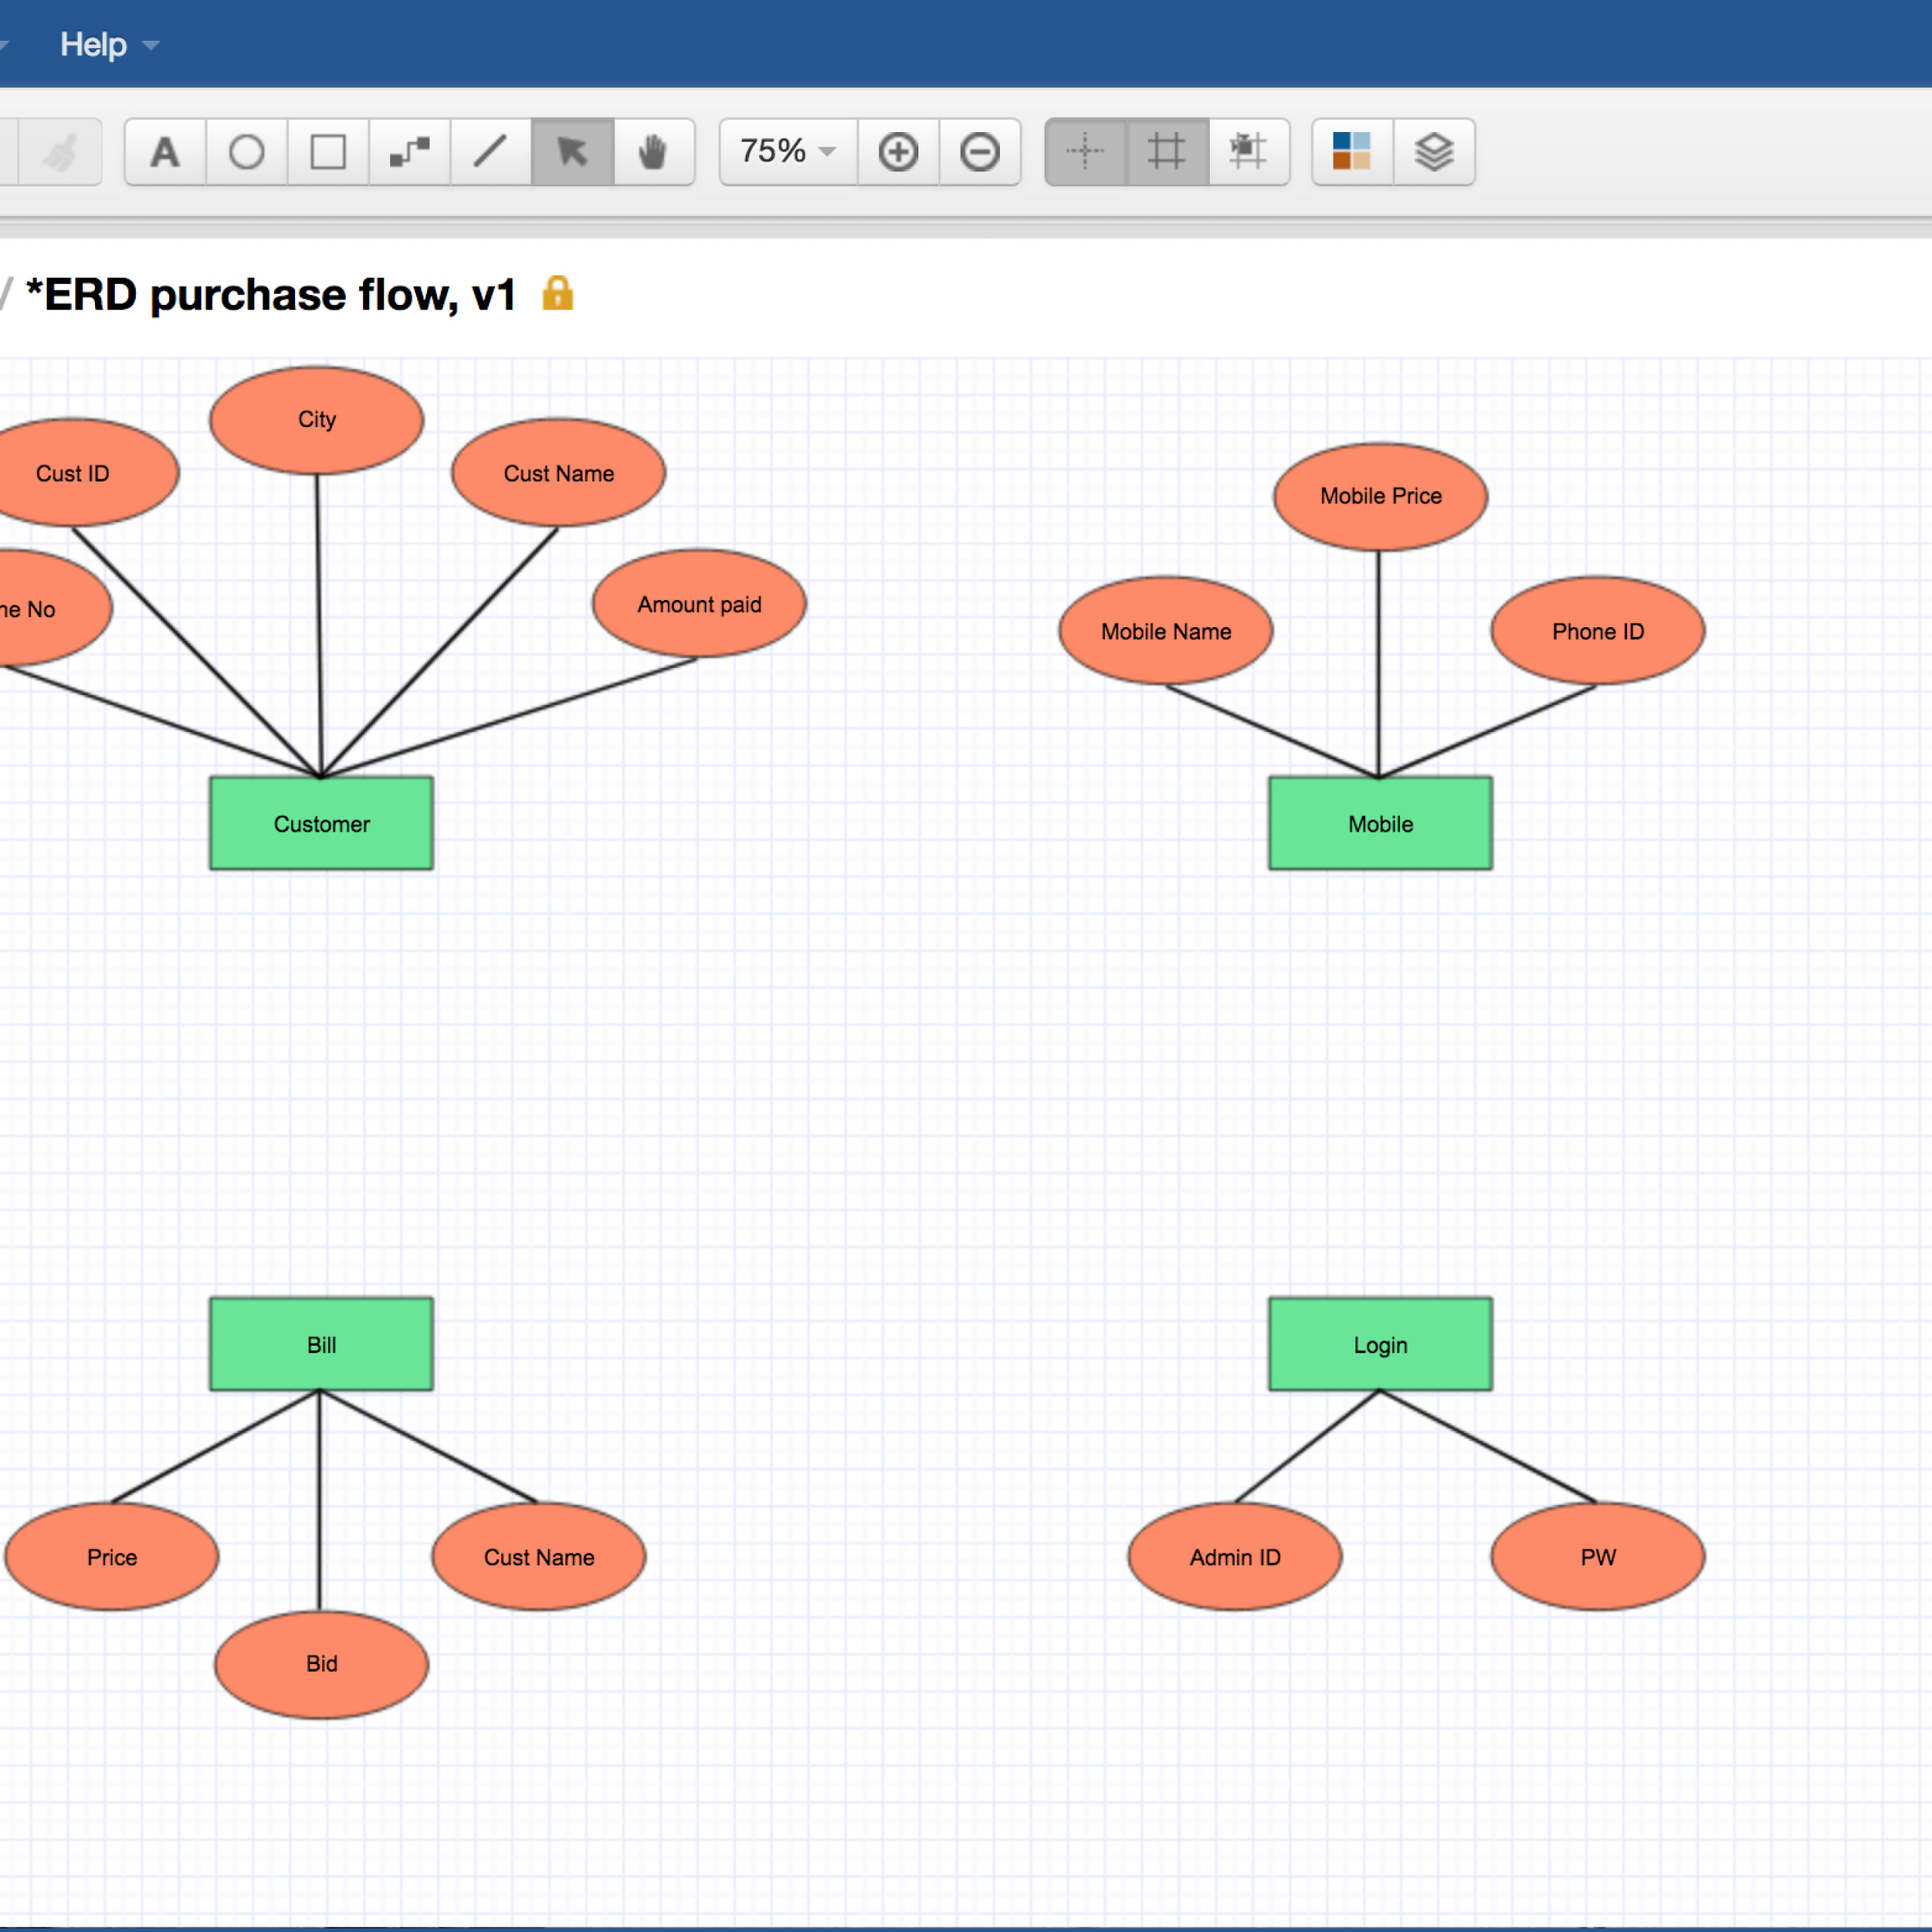 How To Draw An Entity-Relationship Diagram throughout Er Model Maker